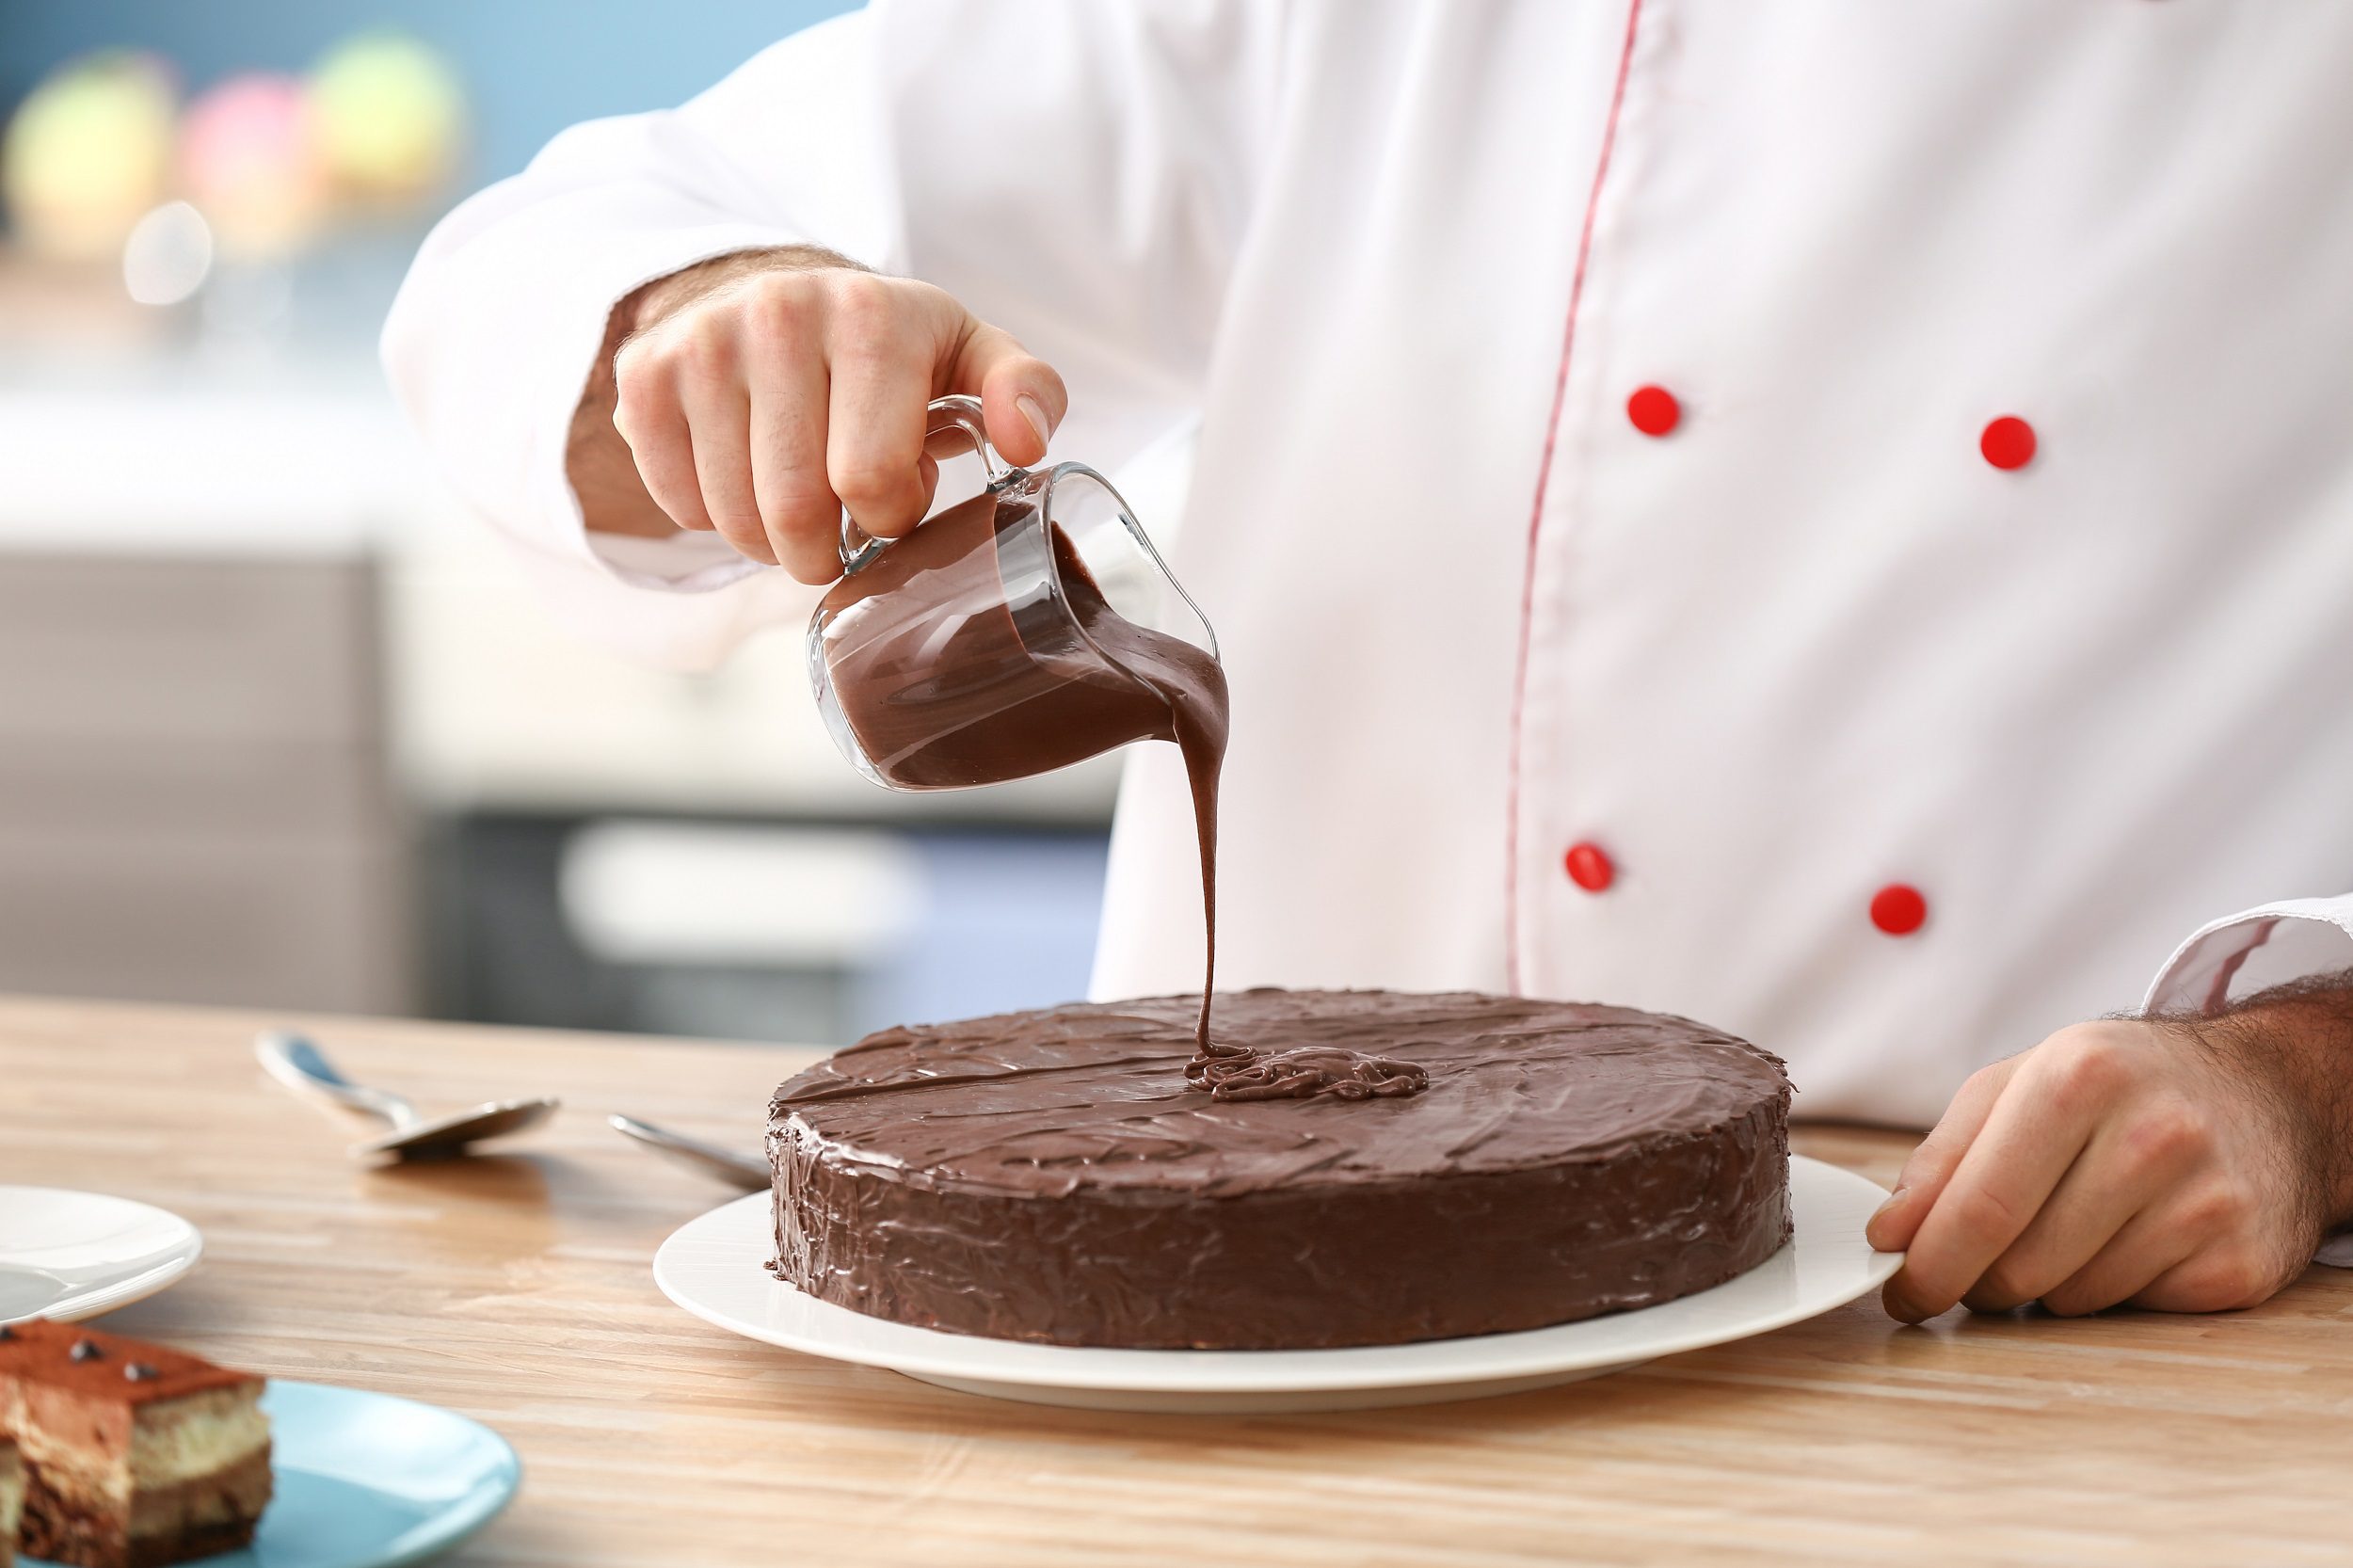 Male confectioner decorating tasty chocolate cake in kitchen, cl